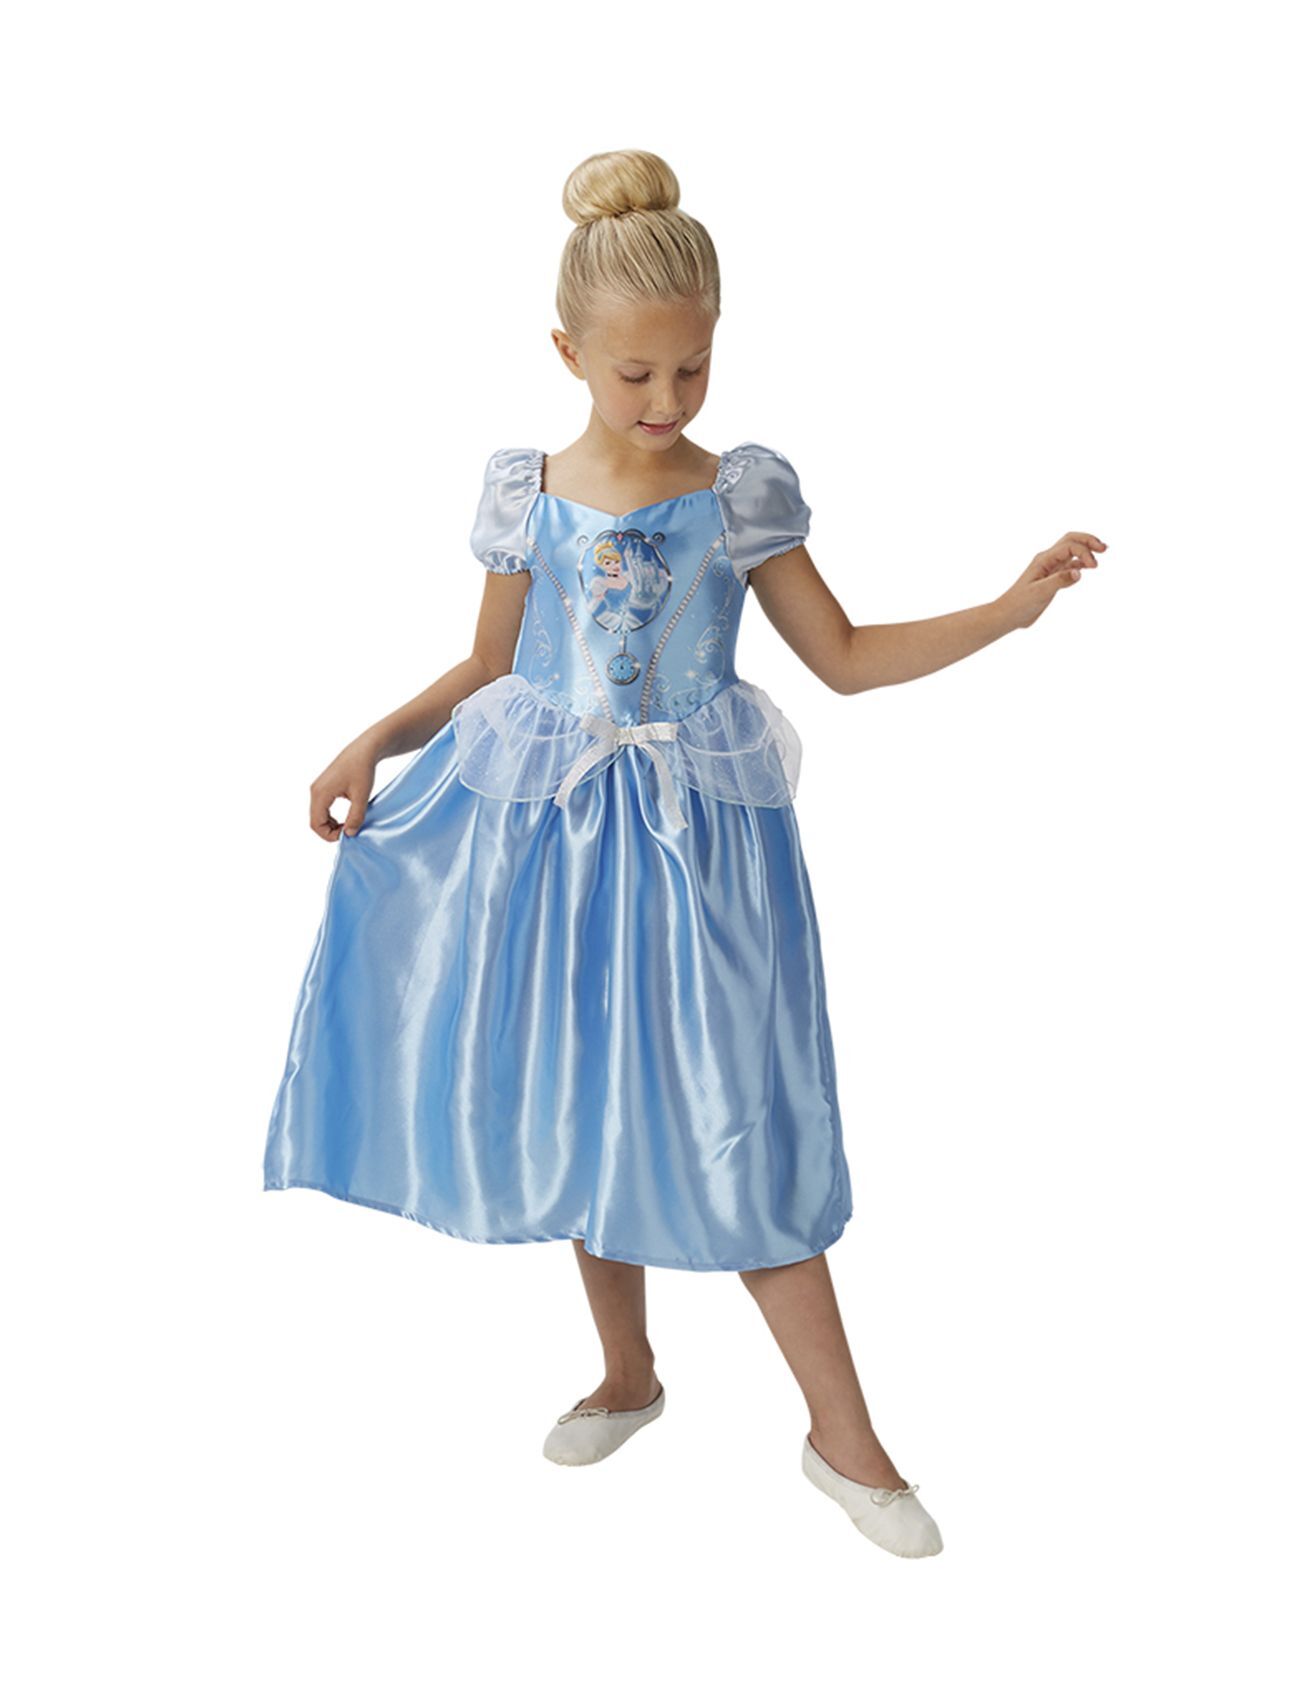 Rubies Costume Rubies Fairytale Cinderella S 104 Cl Toys Costumes & Accessories Character Costumes Blå Rubies